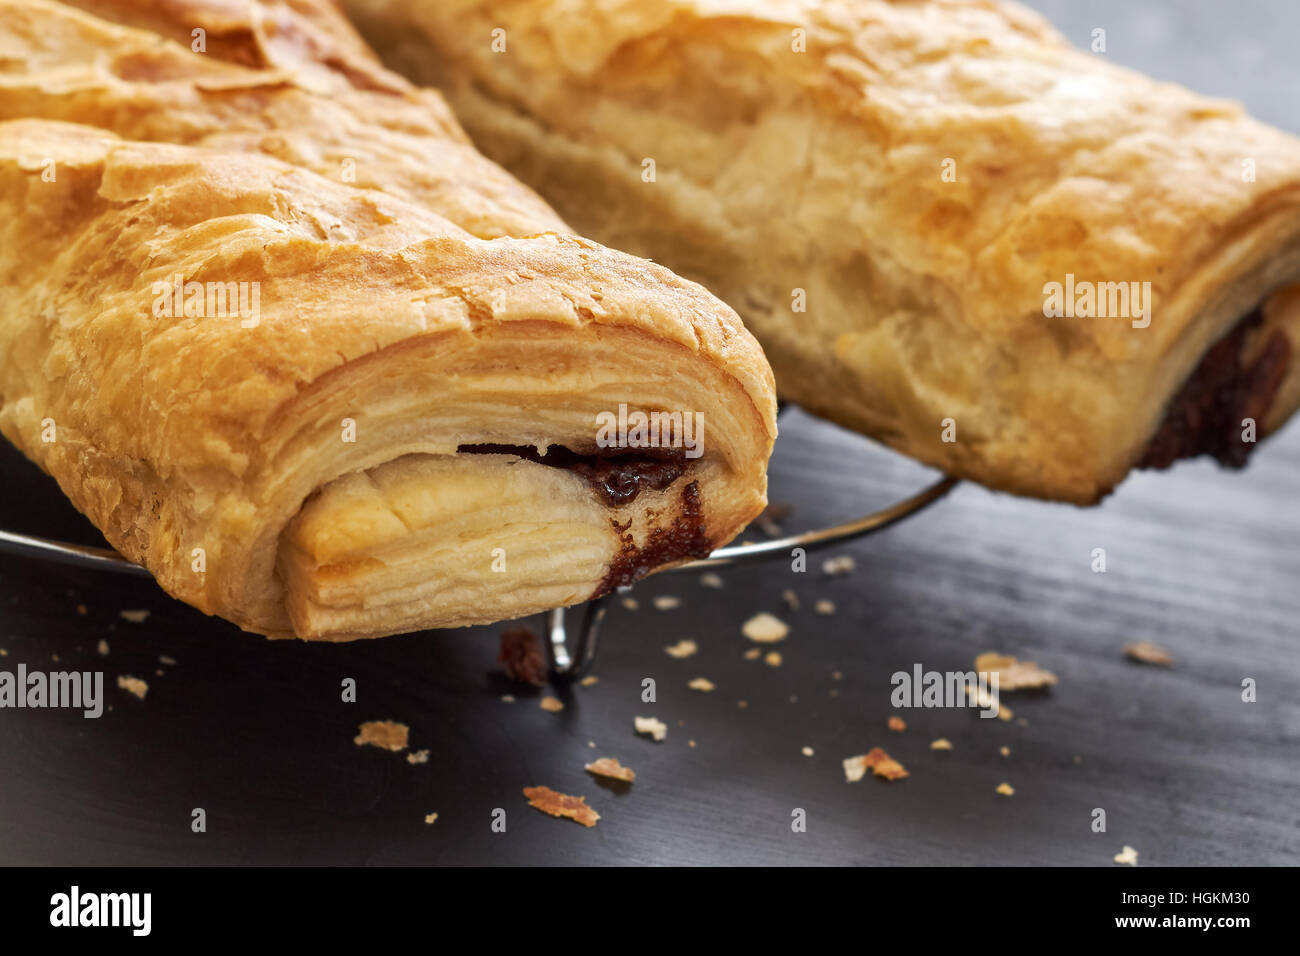 Puff pastry with chocolate filling on black wooden background Stock Photo